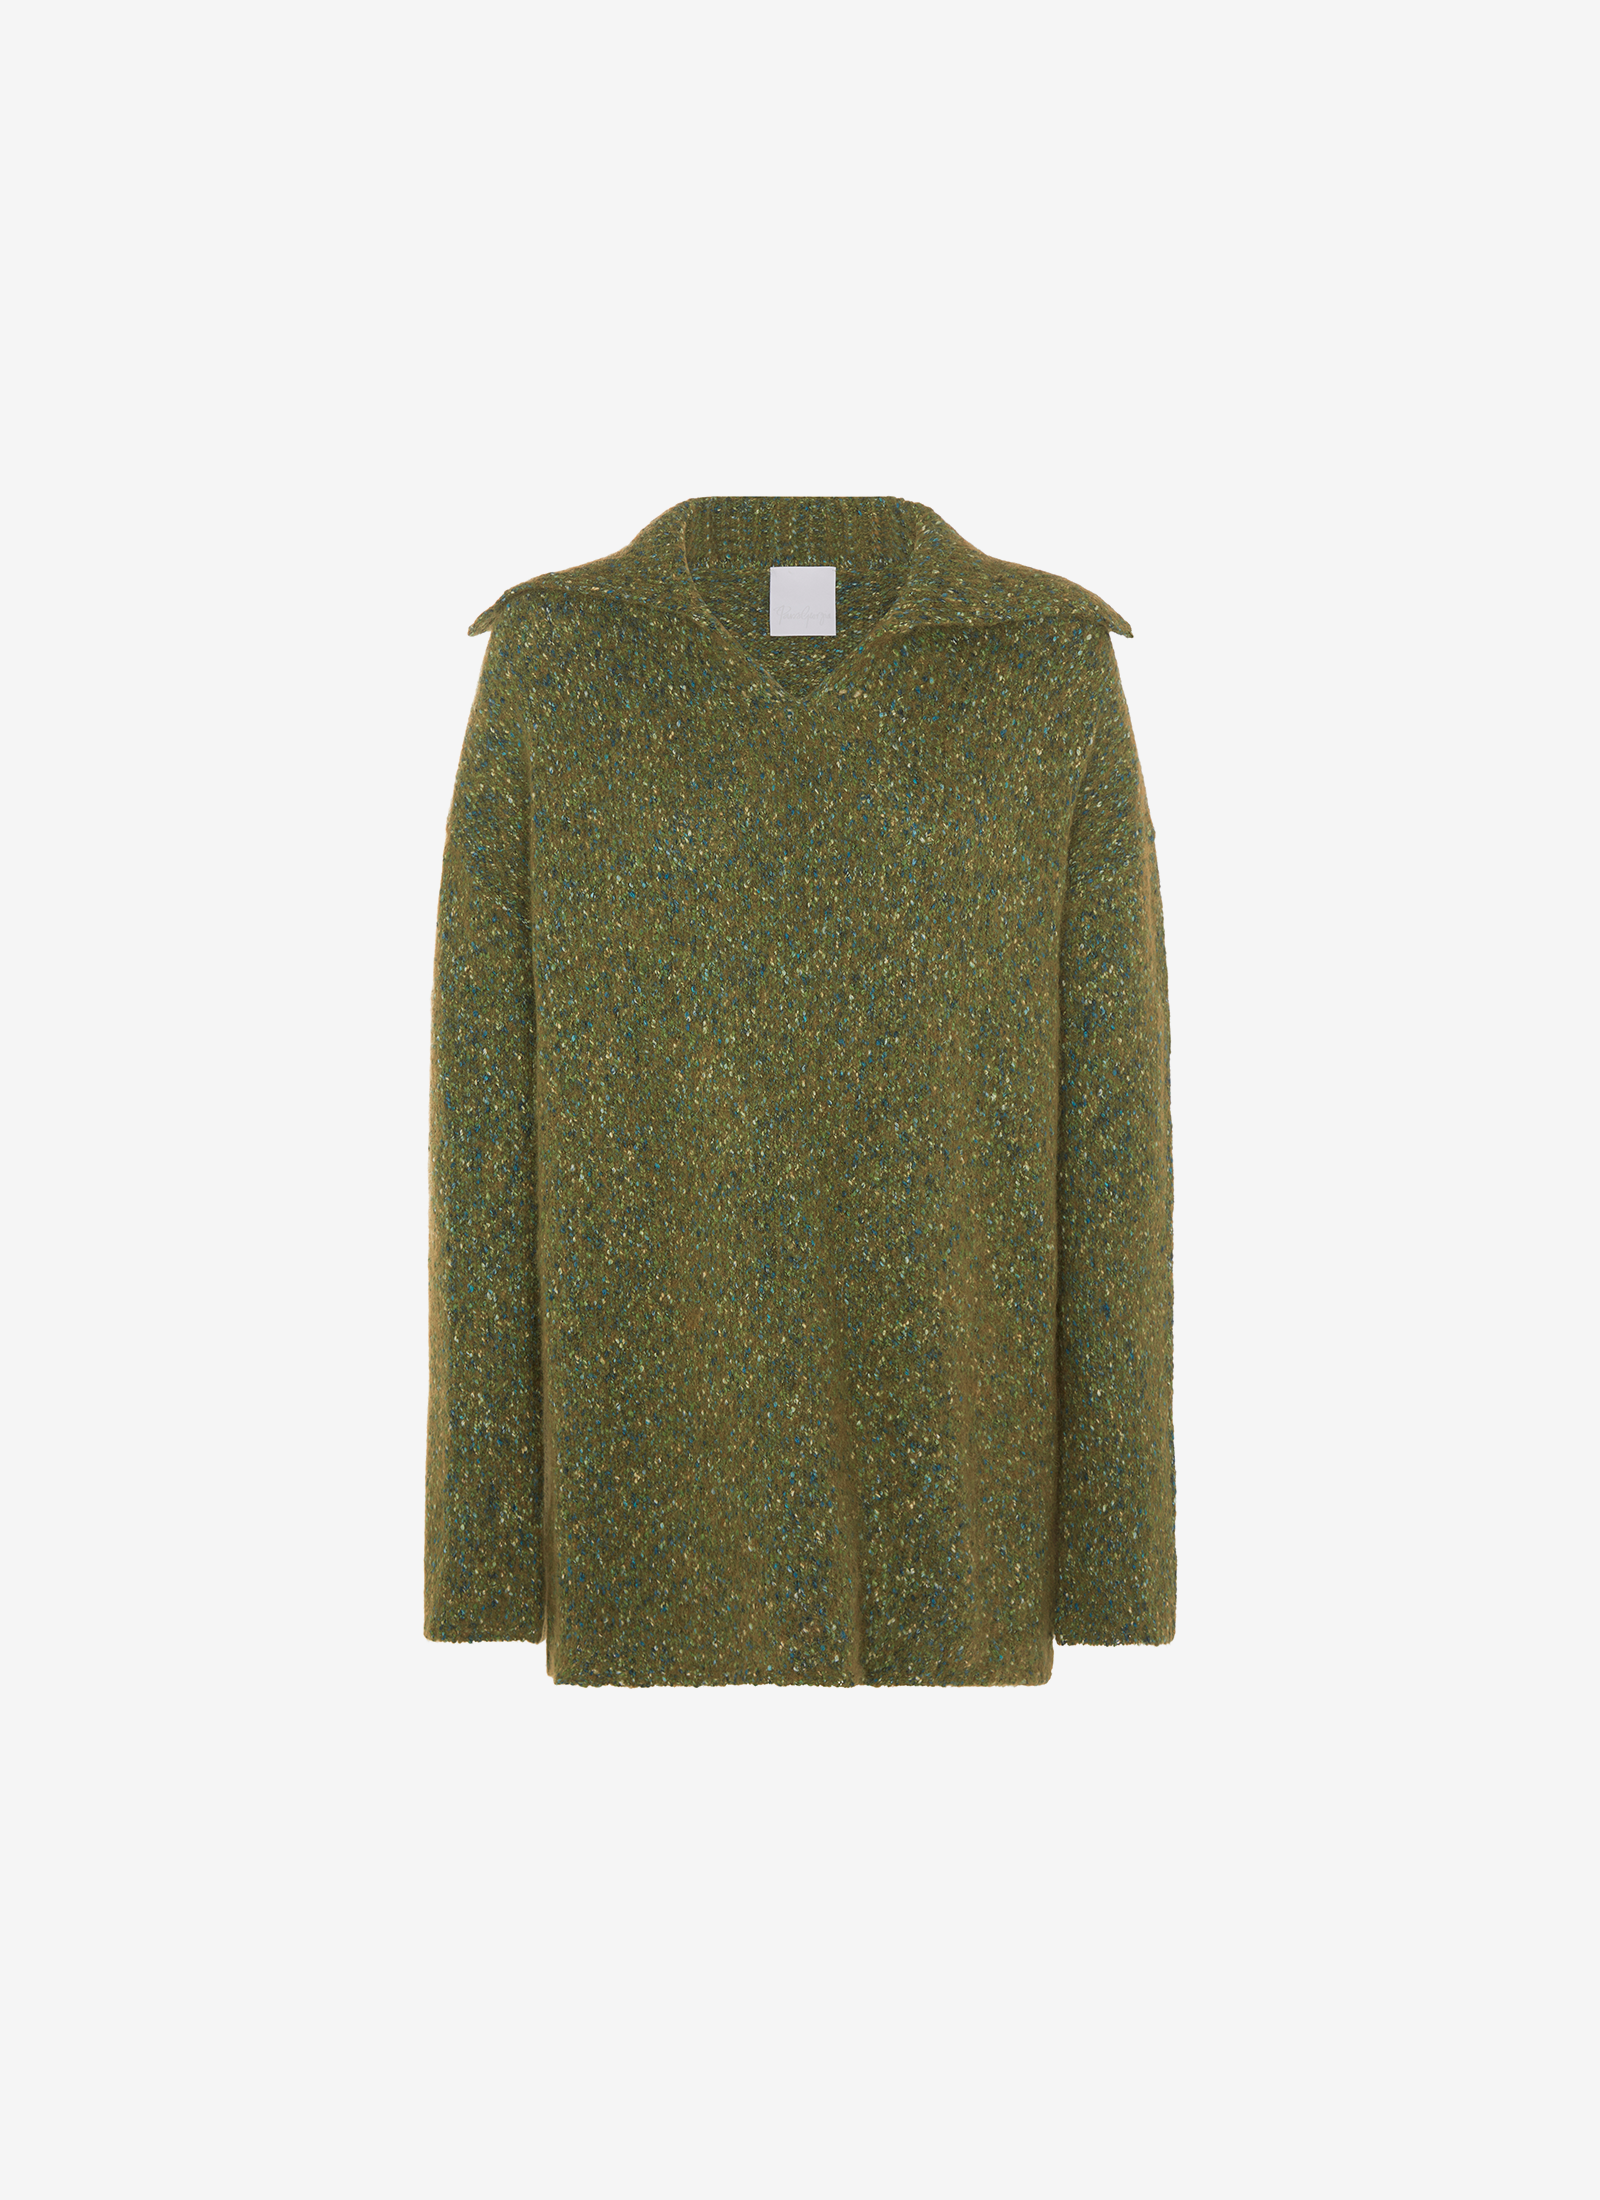 Oversized Collared Knit in Forest